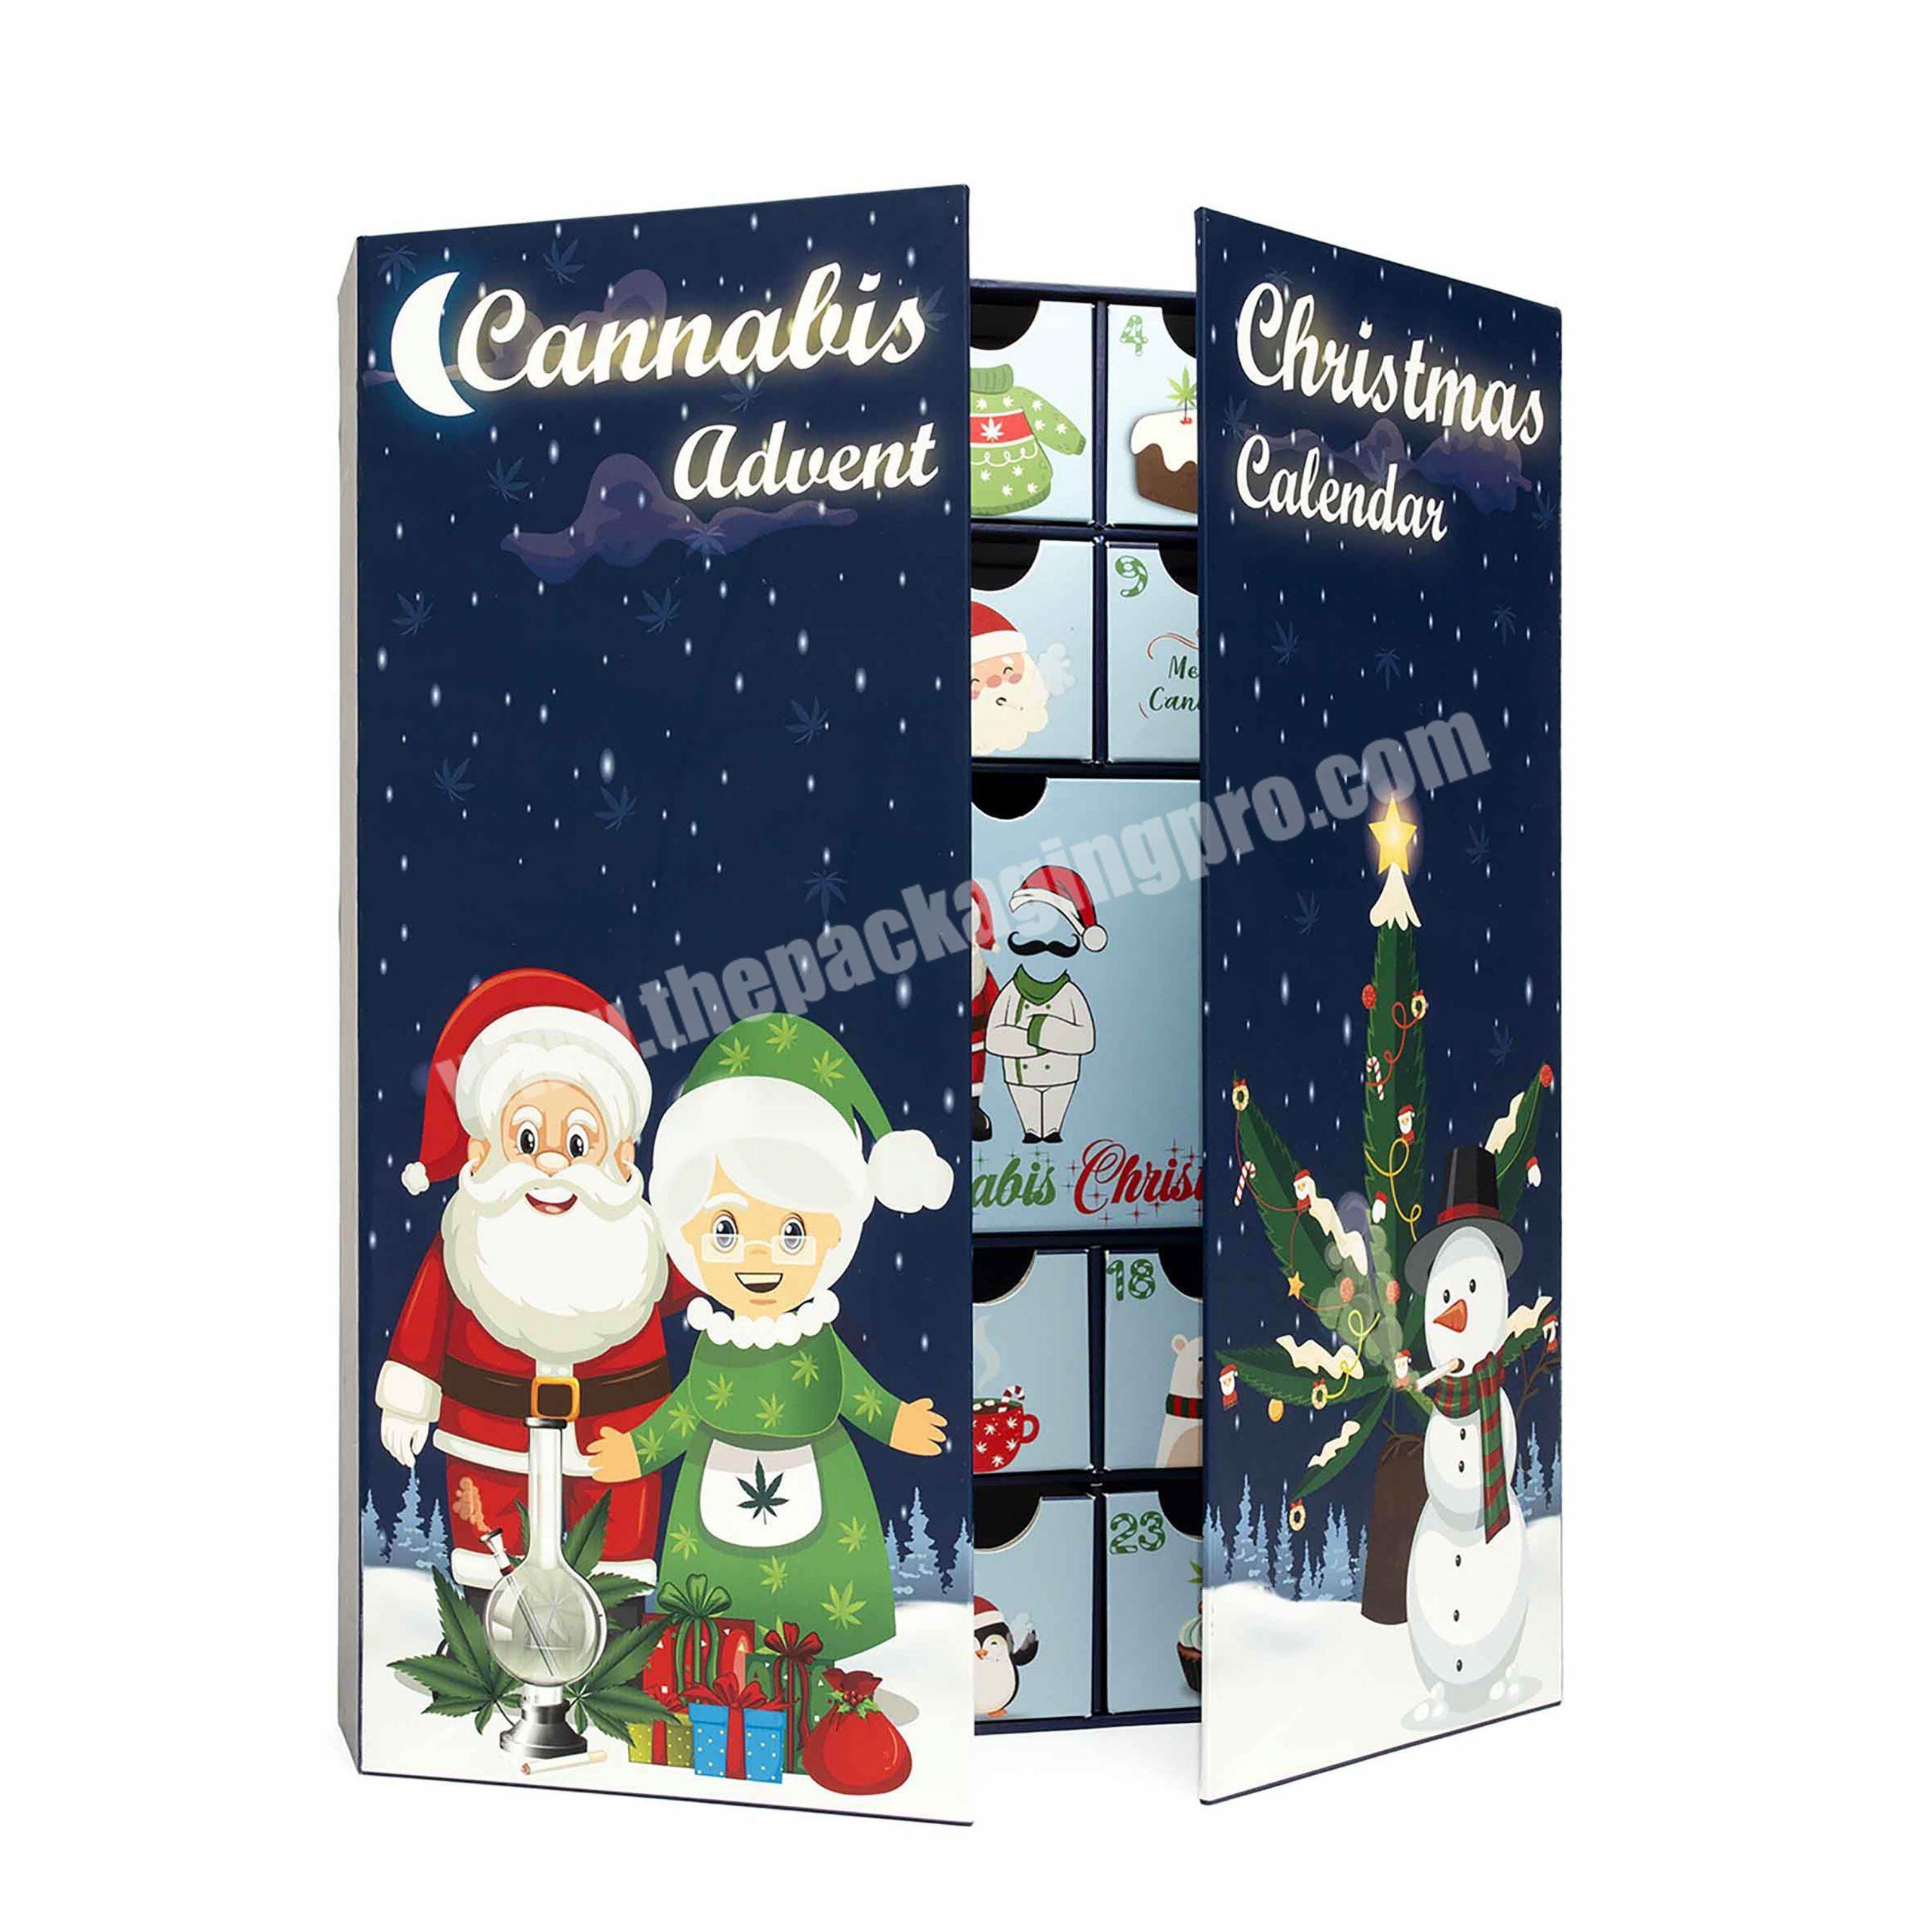 2021 hot sale in Amazon and Ebey custom advent calendar chocolate box with drawer